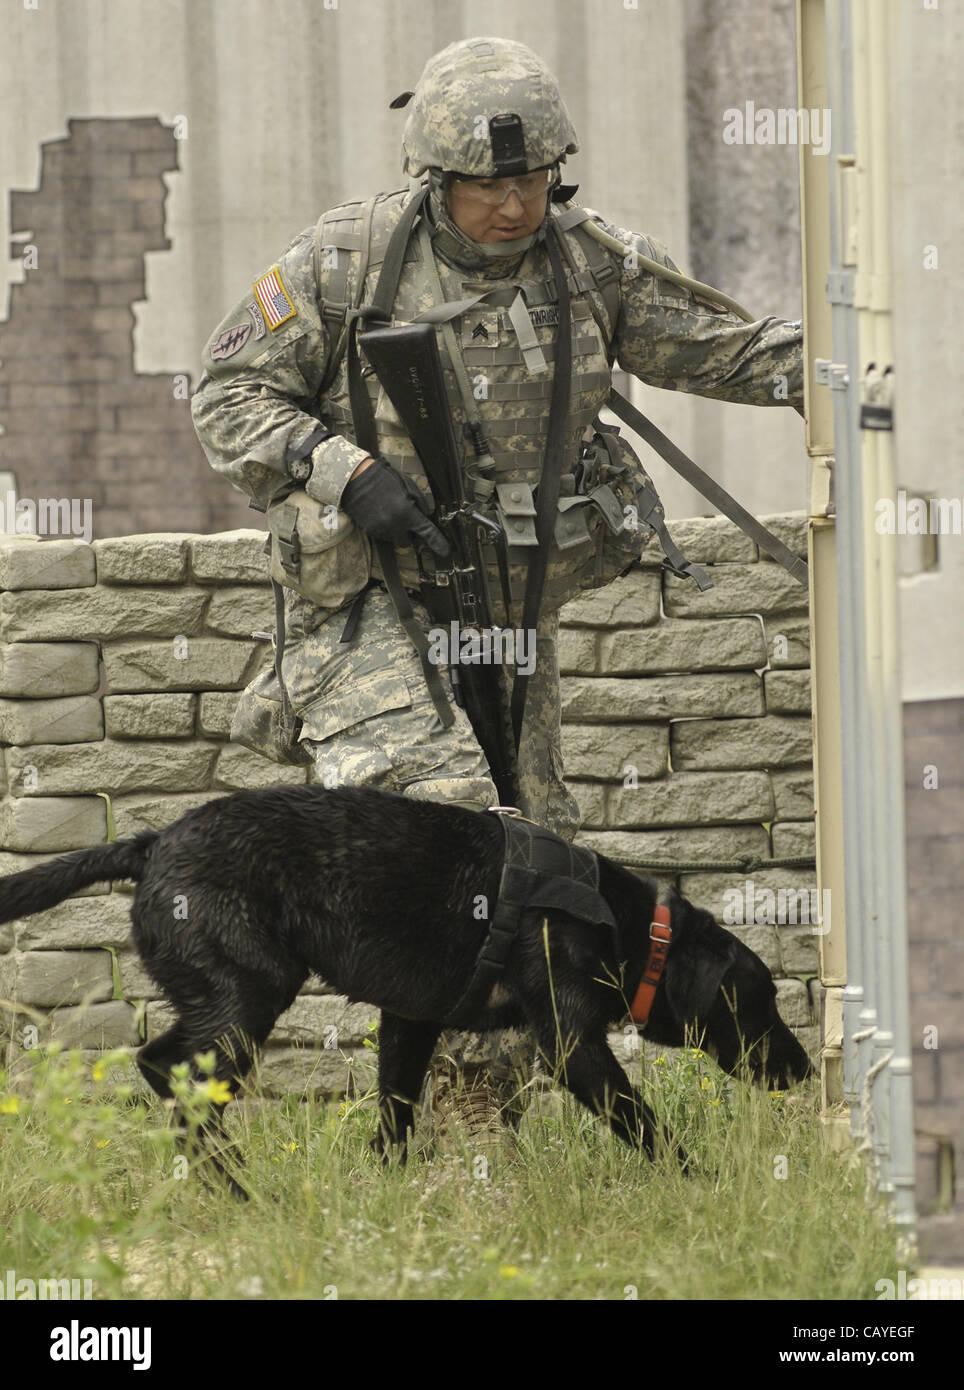 May 4, 2012 - Sgt David Cartwright and his dog during search exercise in a mock village as part of the Department of Defense K9 Trials at Lackland Air Force Base in San Antonio, Texas.  They'll test military working dog teams in a variety of missions, including detecting narcotics or explosives, pro Stock Photo